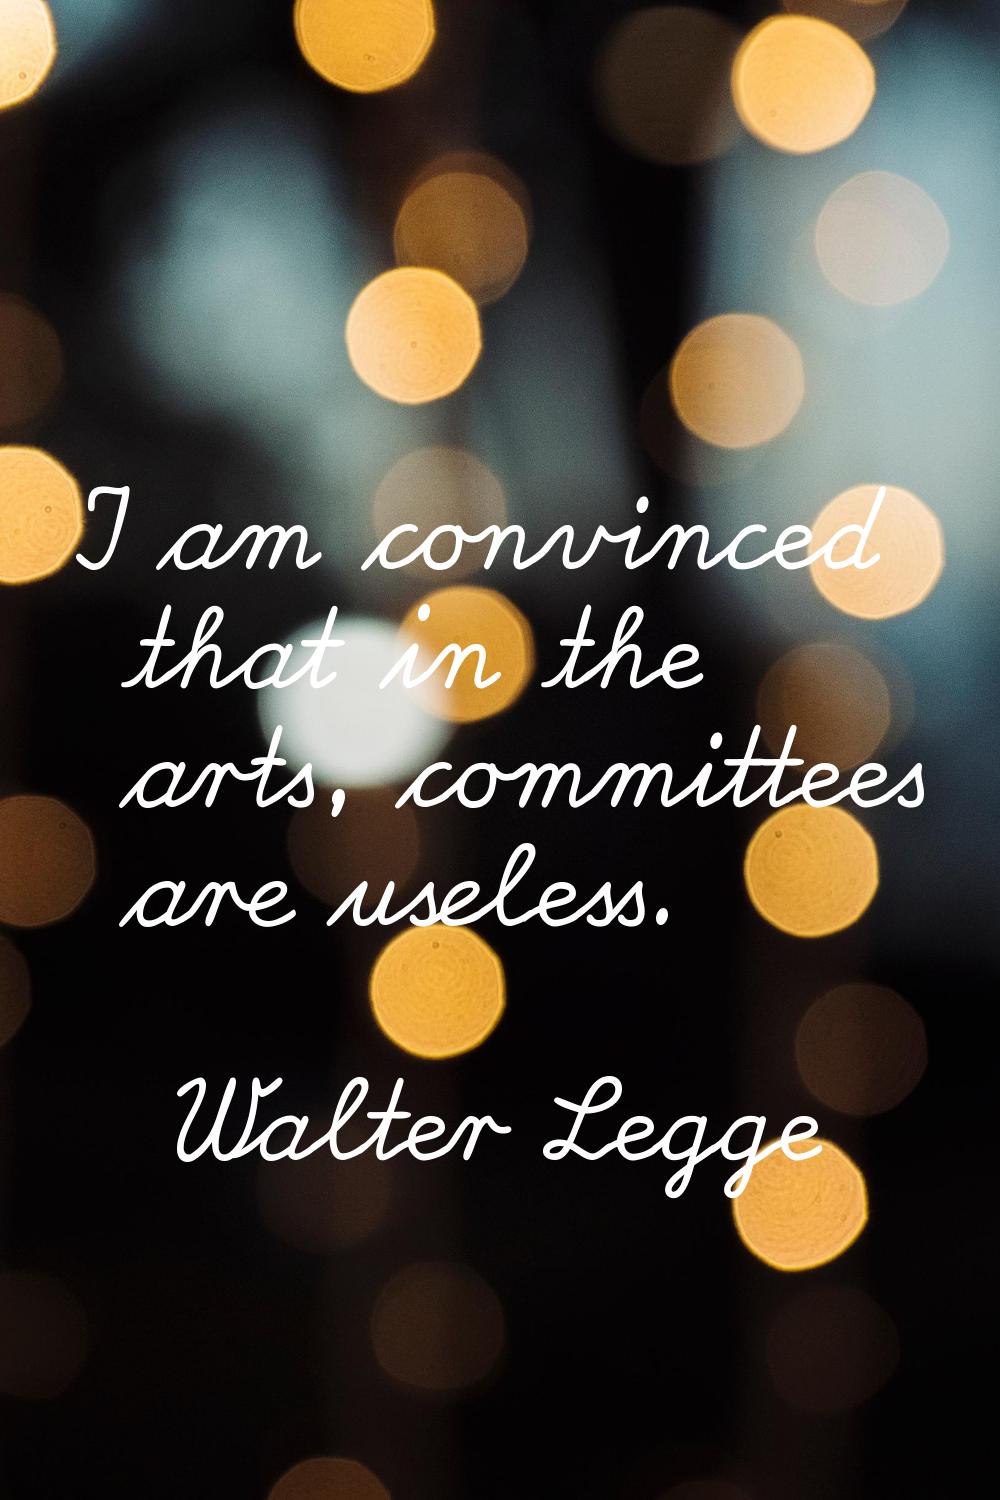 I am convinced that in the arts, committees are useless.